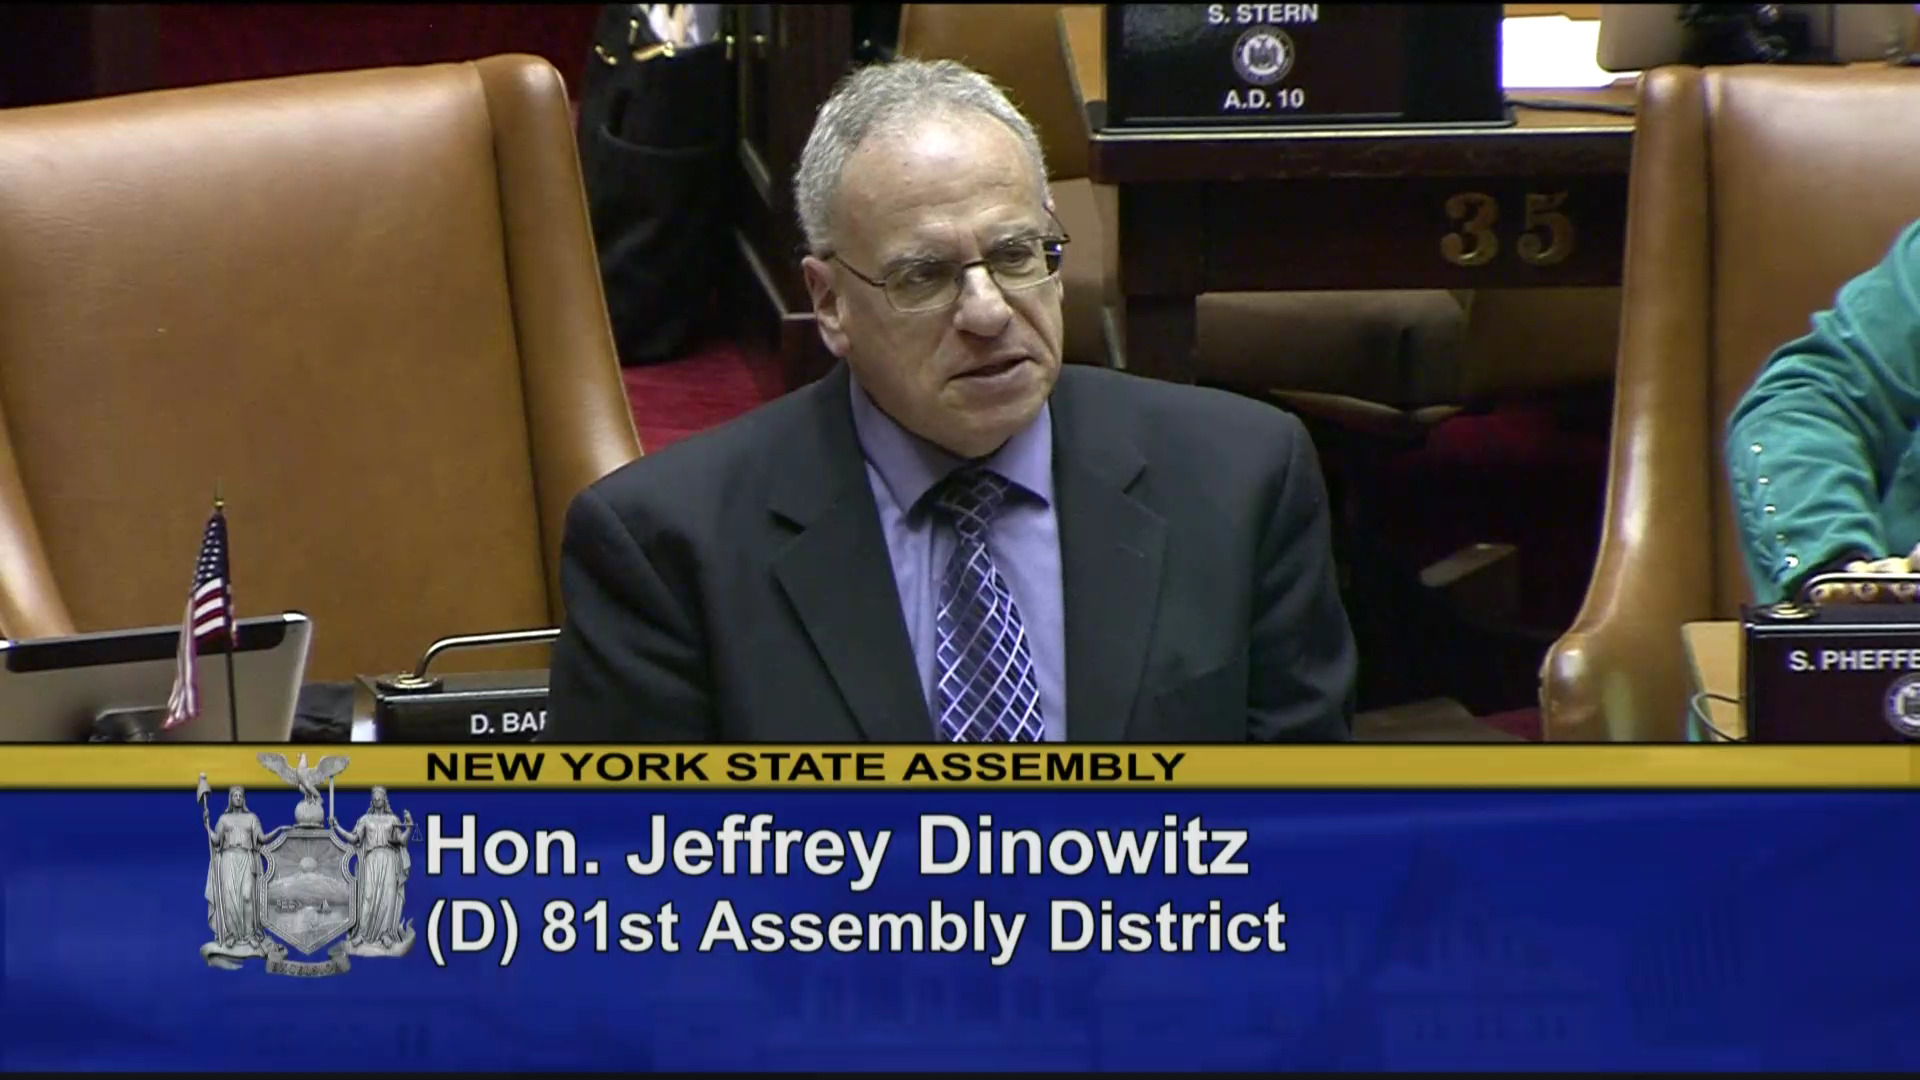 Dinowitz Works to Prevent Dangerous Individuals from Obtaining Guns